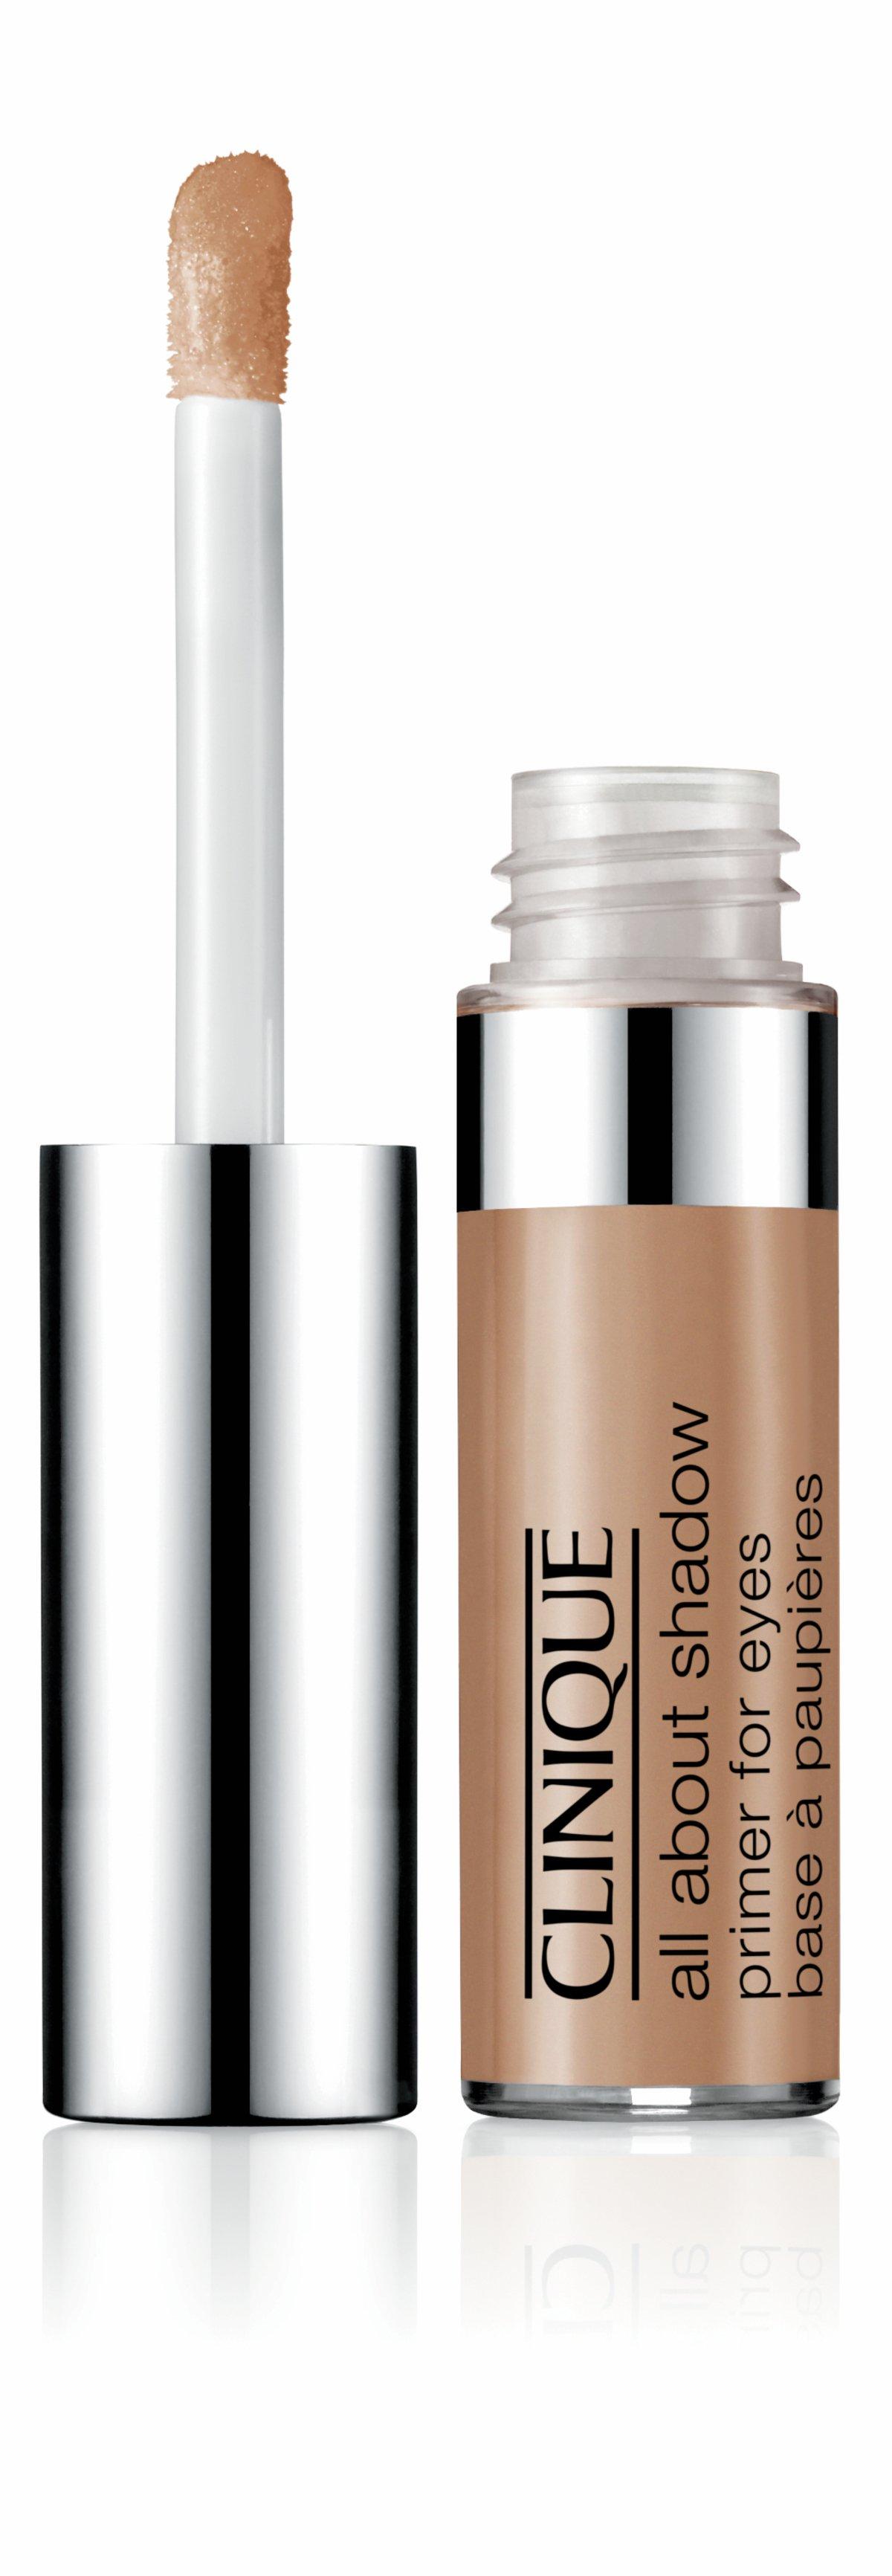 CLINIQUE All About Shadow All About Shadow Primer Eyes Very Fair 